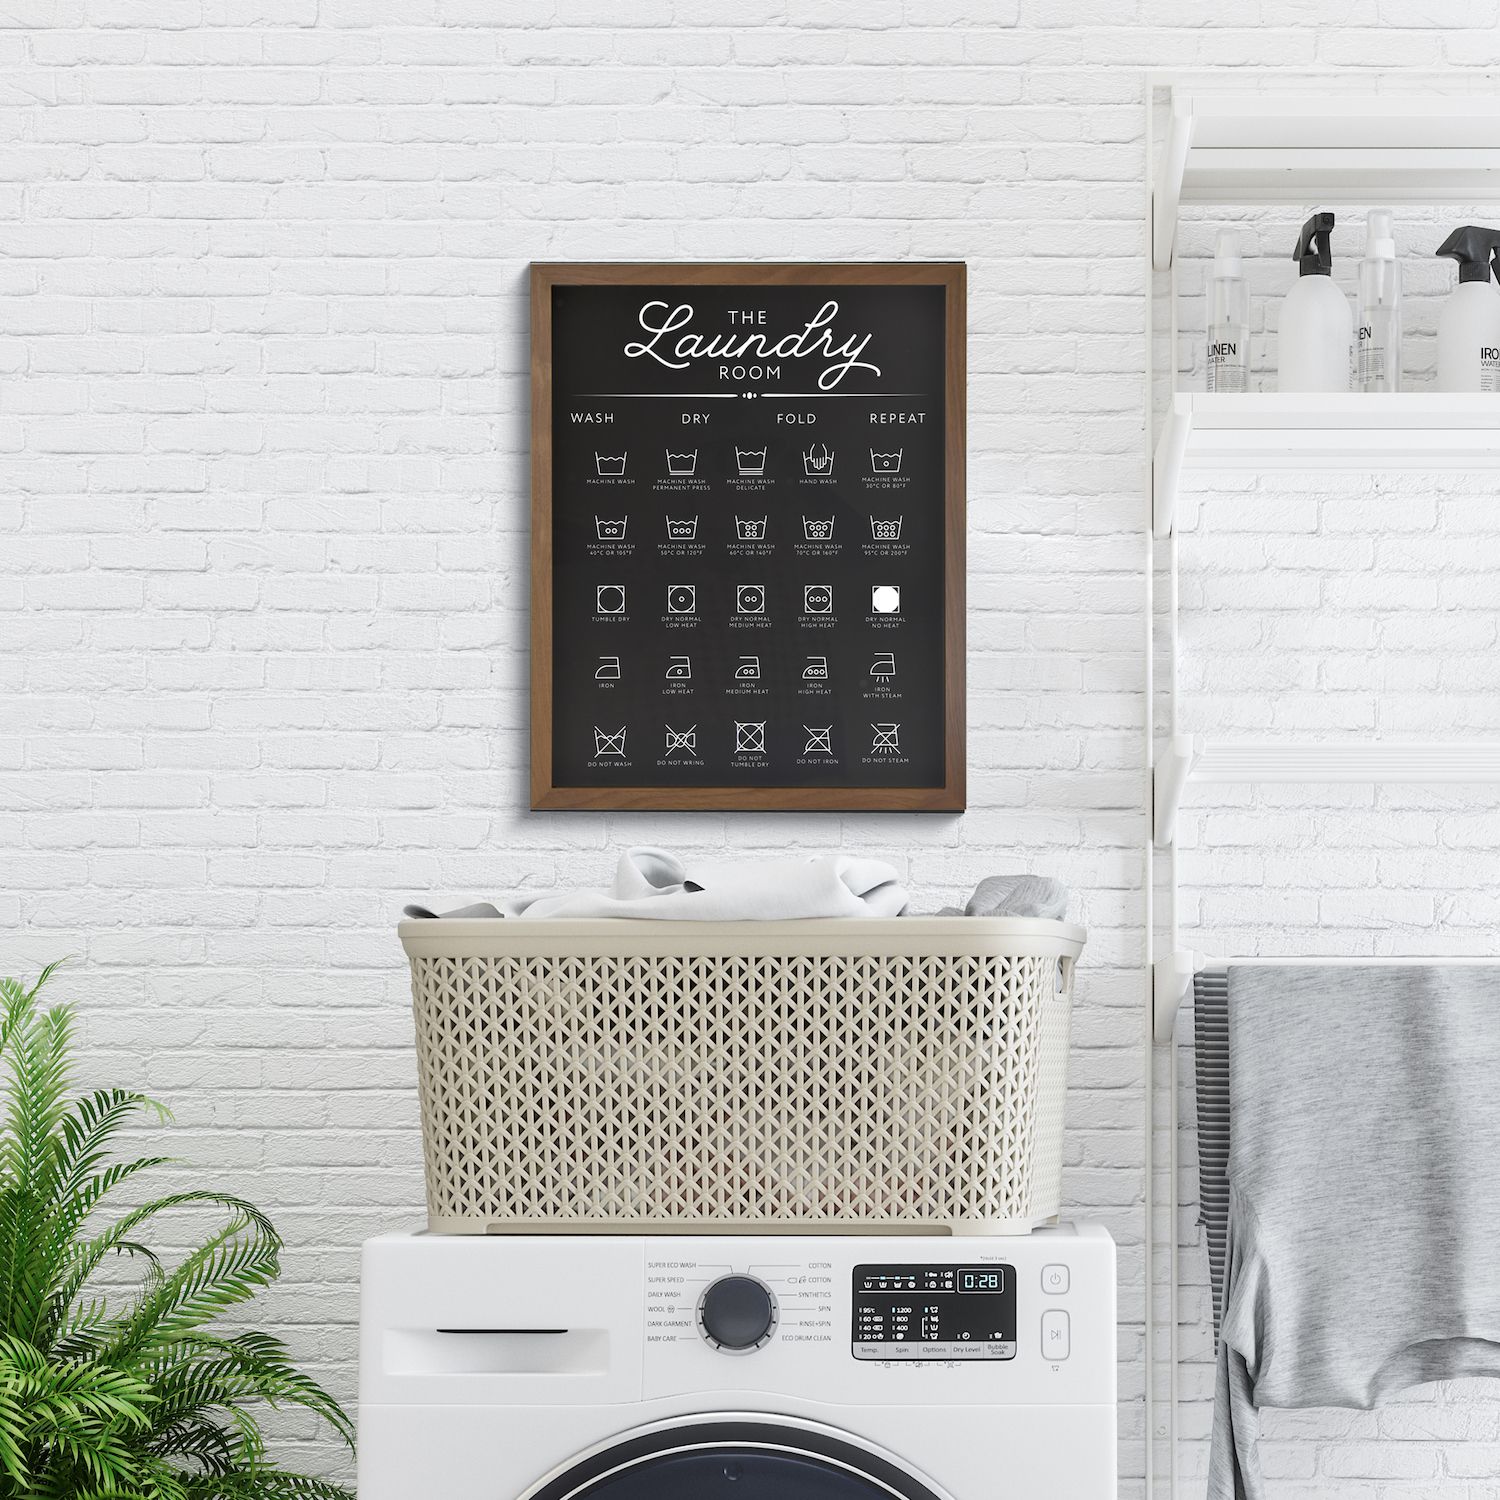 Elevate Your Laundry Room With Creative Decorating Ideas From Kohl’s